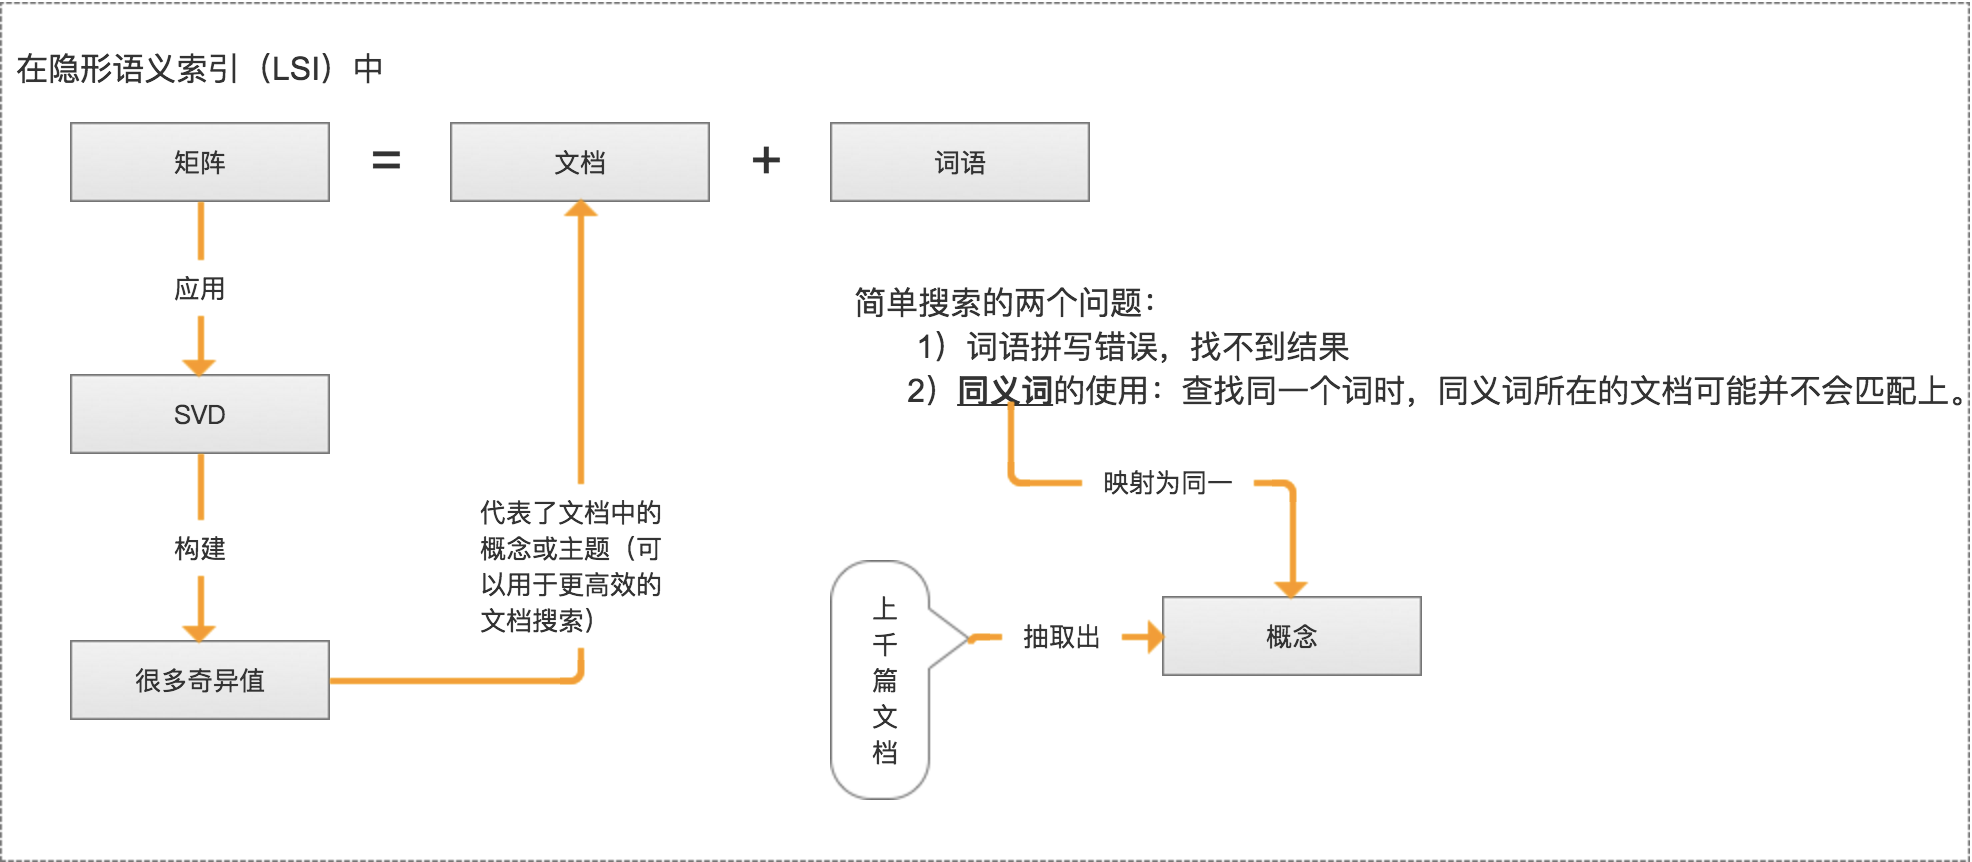 img/AiLearning/ml/14.SVD/使用SVD简化数据-LSI举例.png